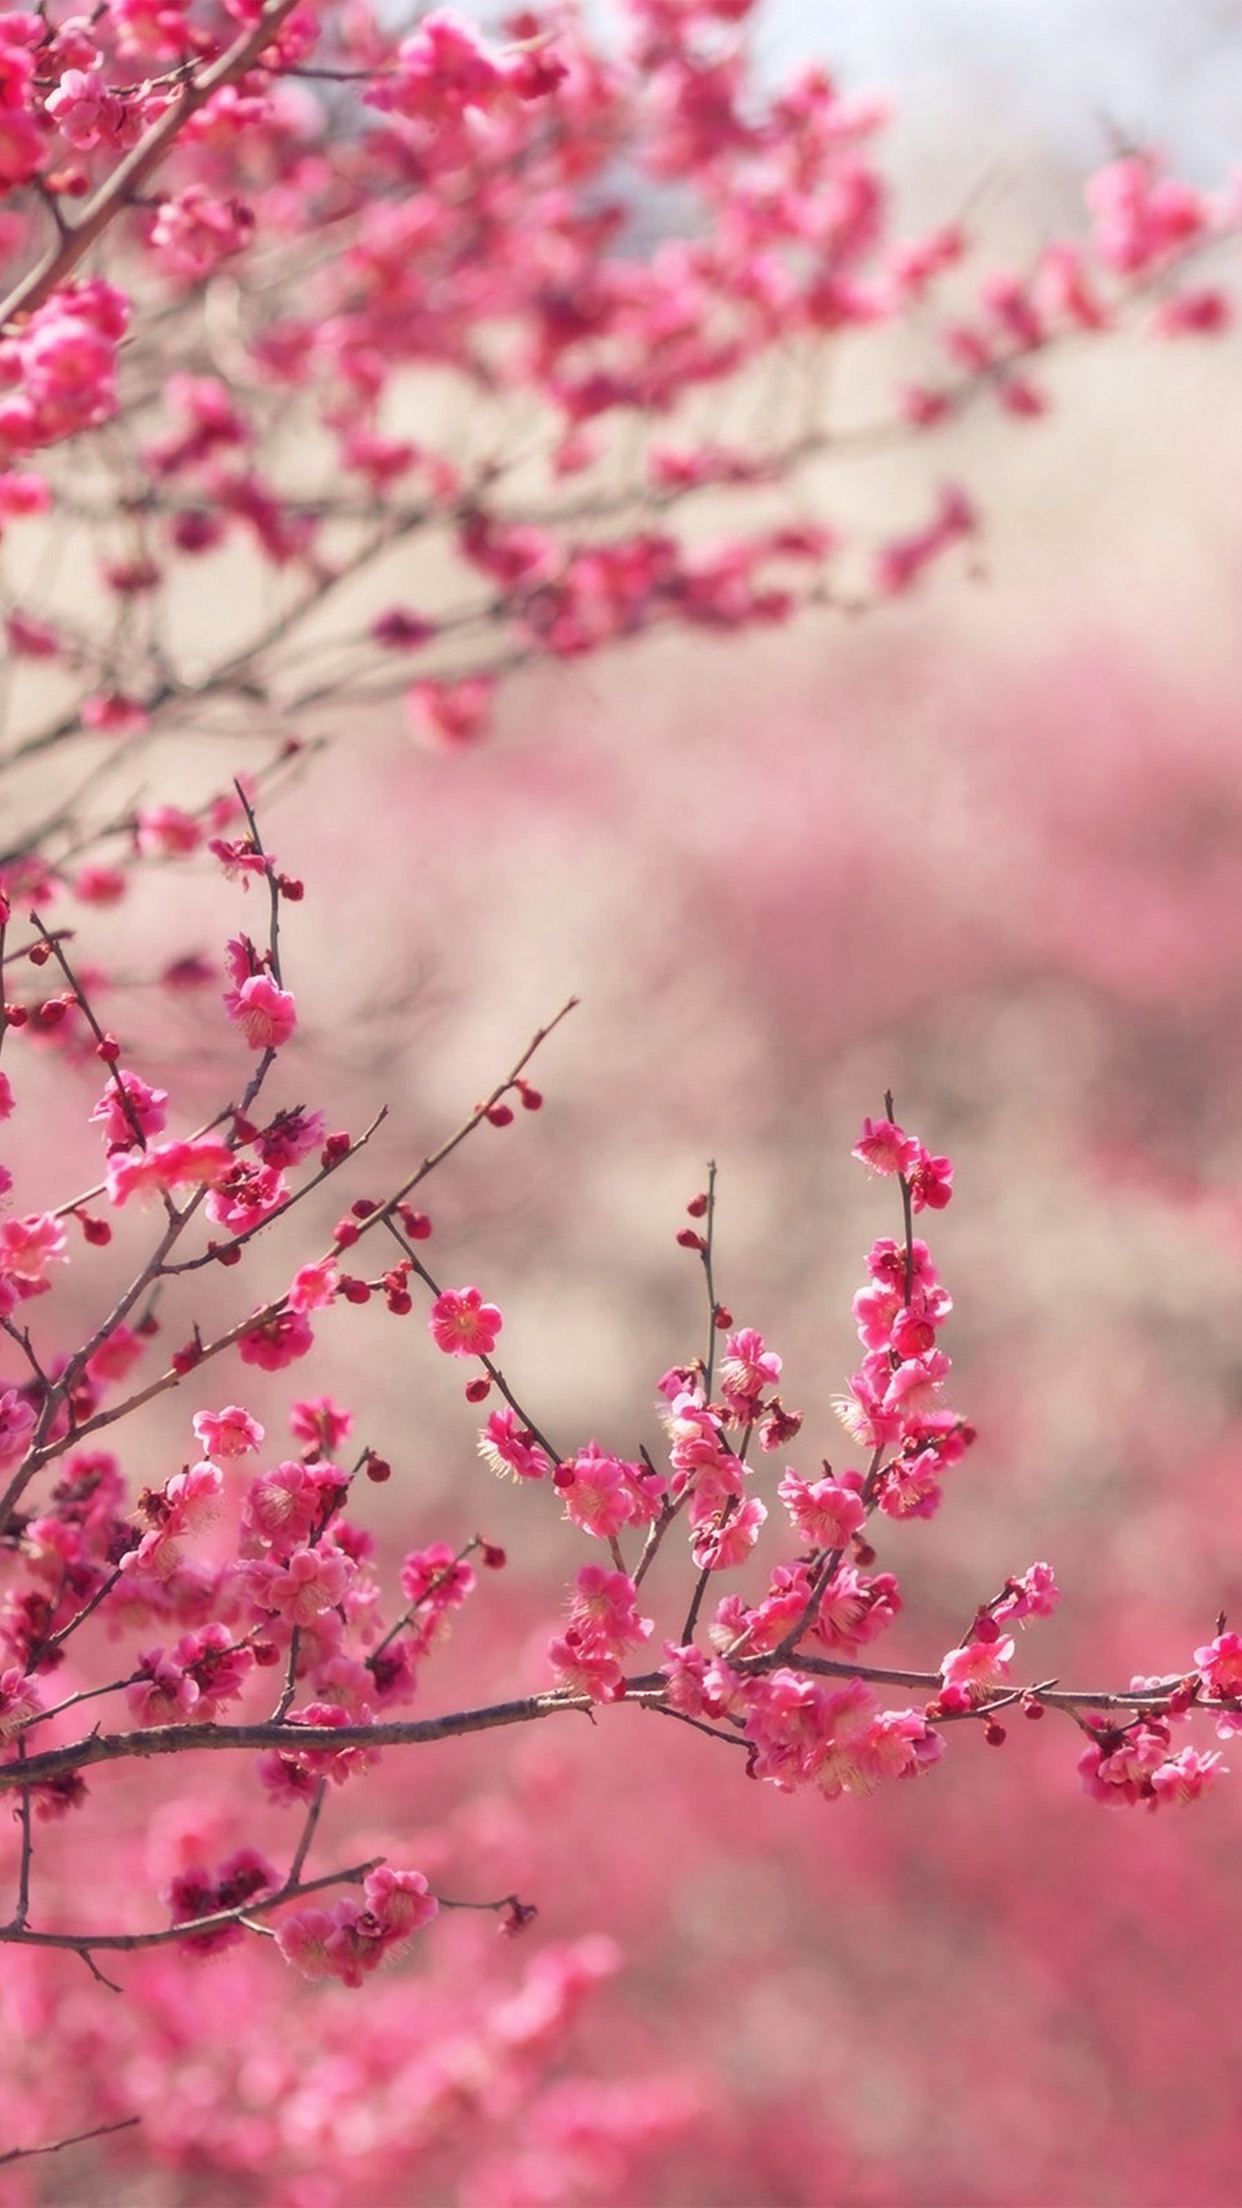 Blossom Sprin - HD Wallpapers and Backgrounds for iPhone